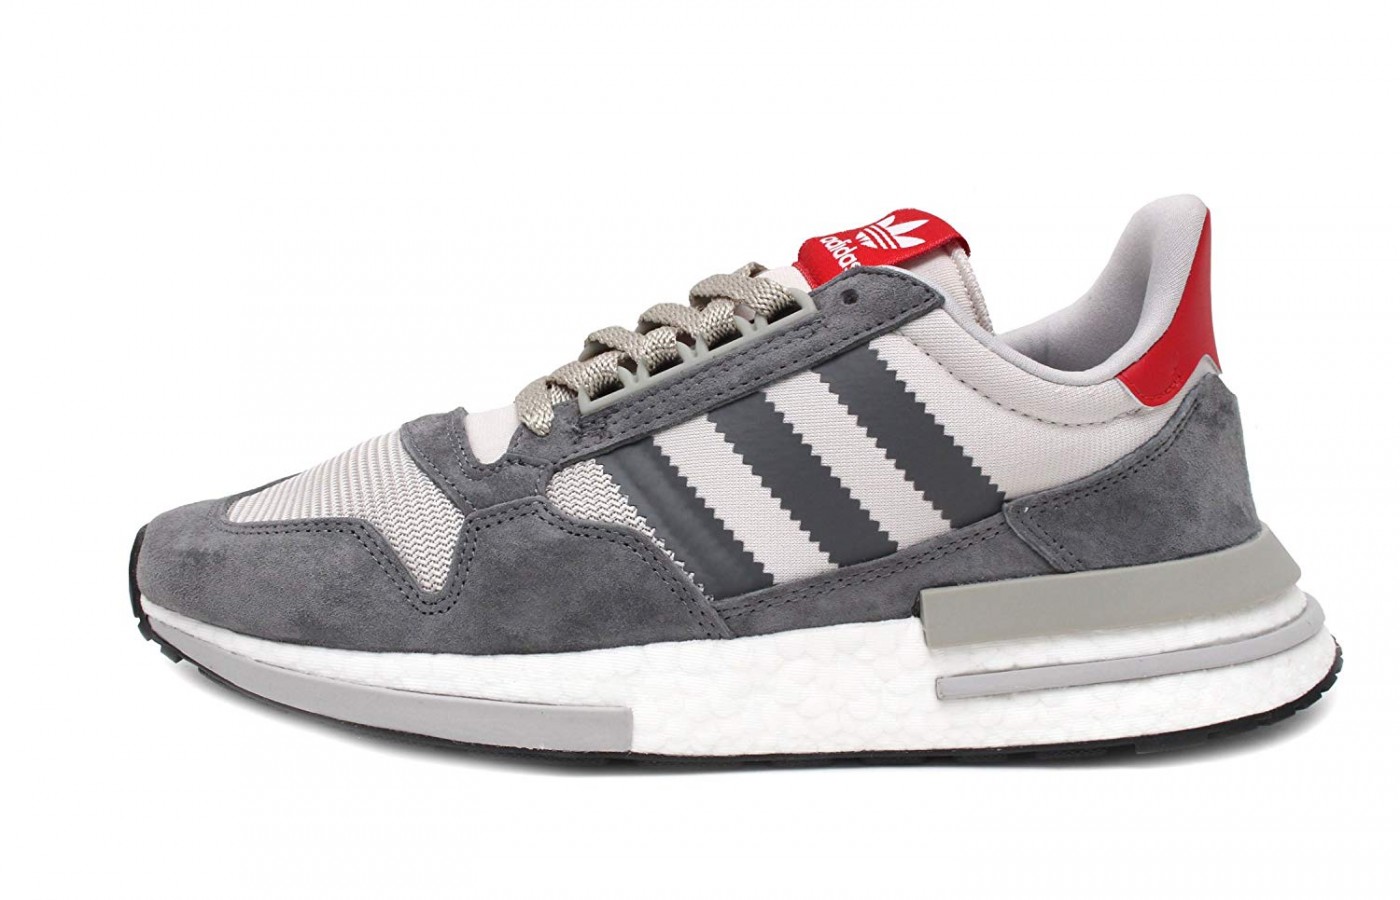 zx 500 rm boost